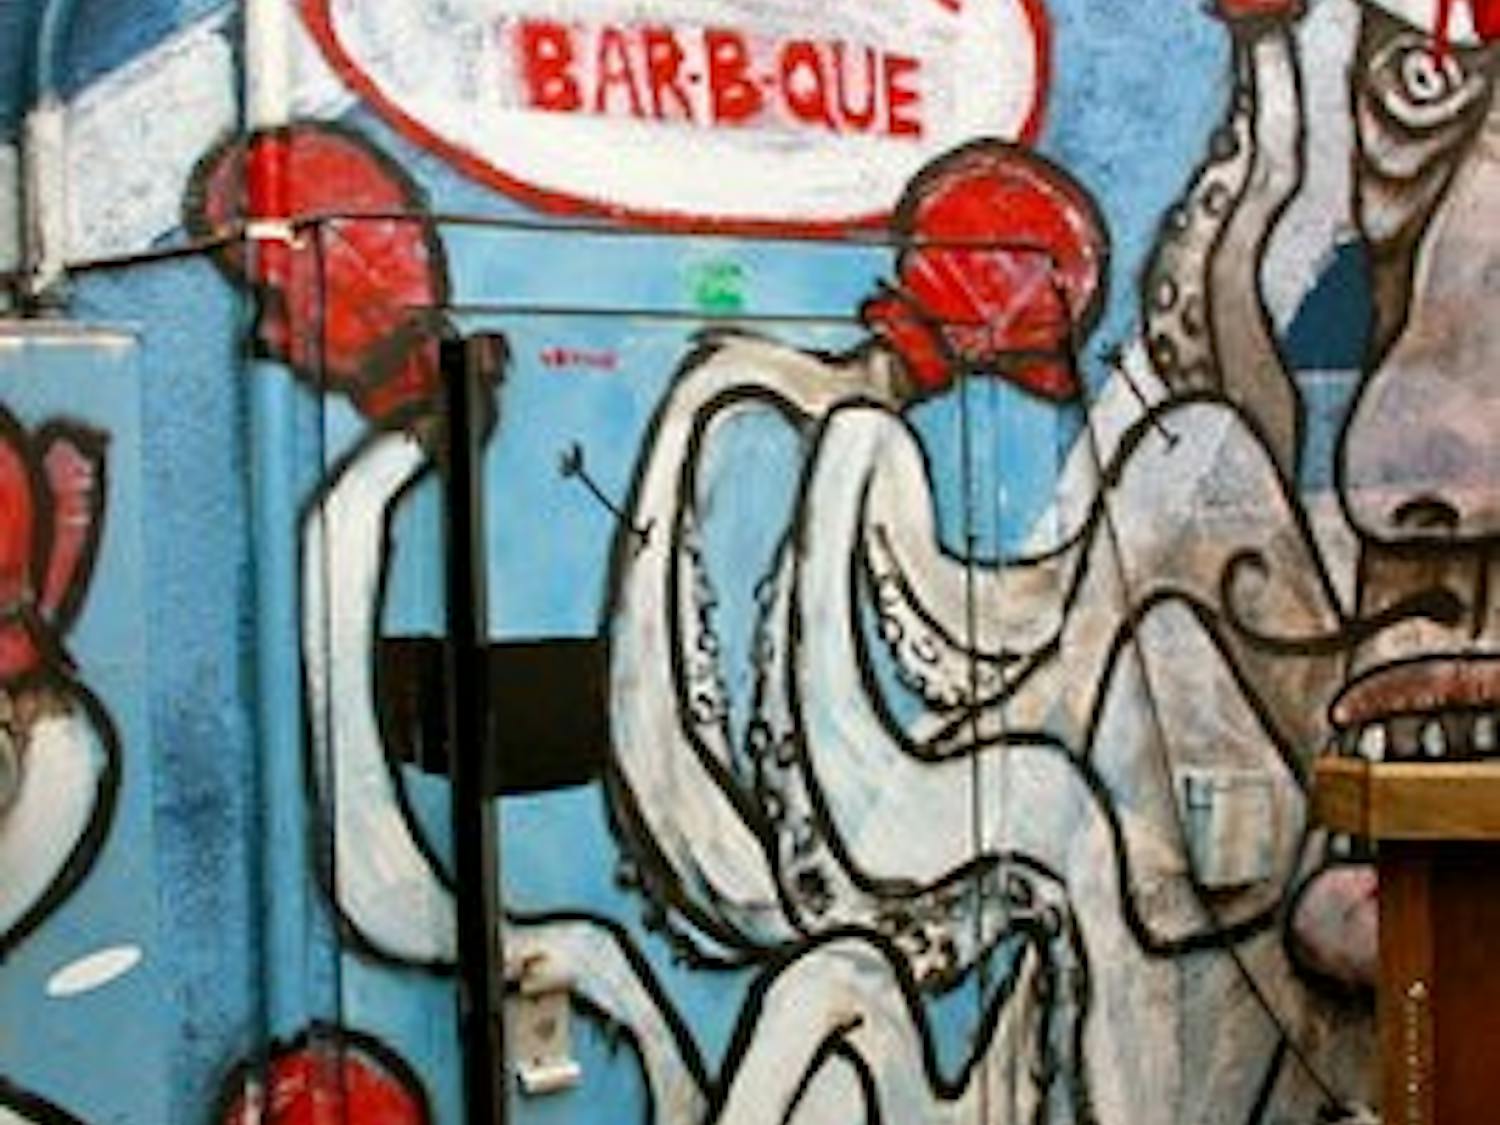 The murals Christian Hamrick painted at Moe's Bar-B-Que are funky, one-of-a-kind anecdotes that cover the brick walls on the inside of the restaurant and outside on the back patio. (Courtesy of Chelsea Wooten)